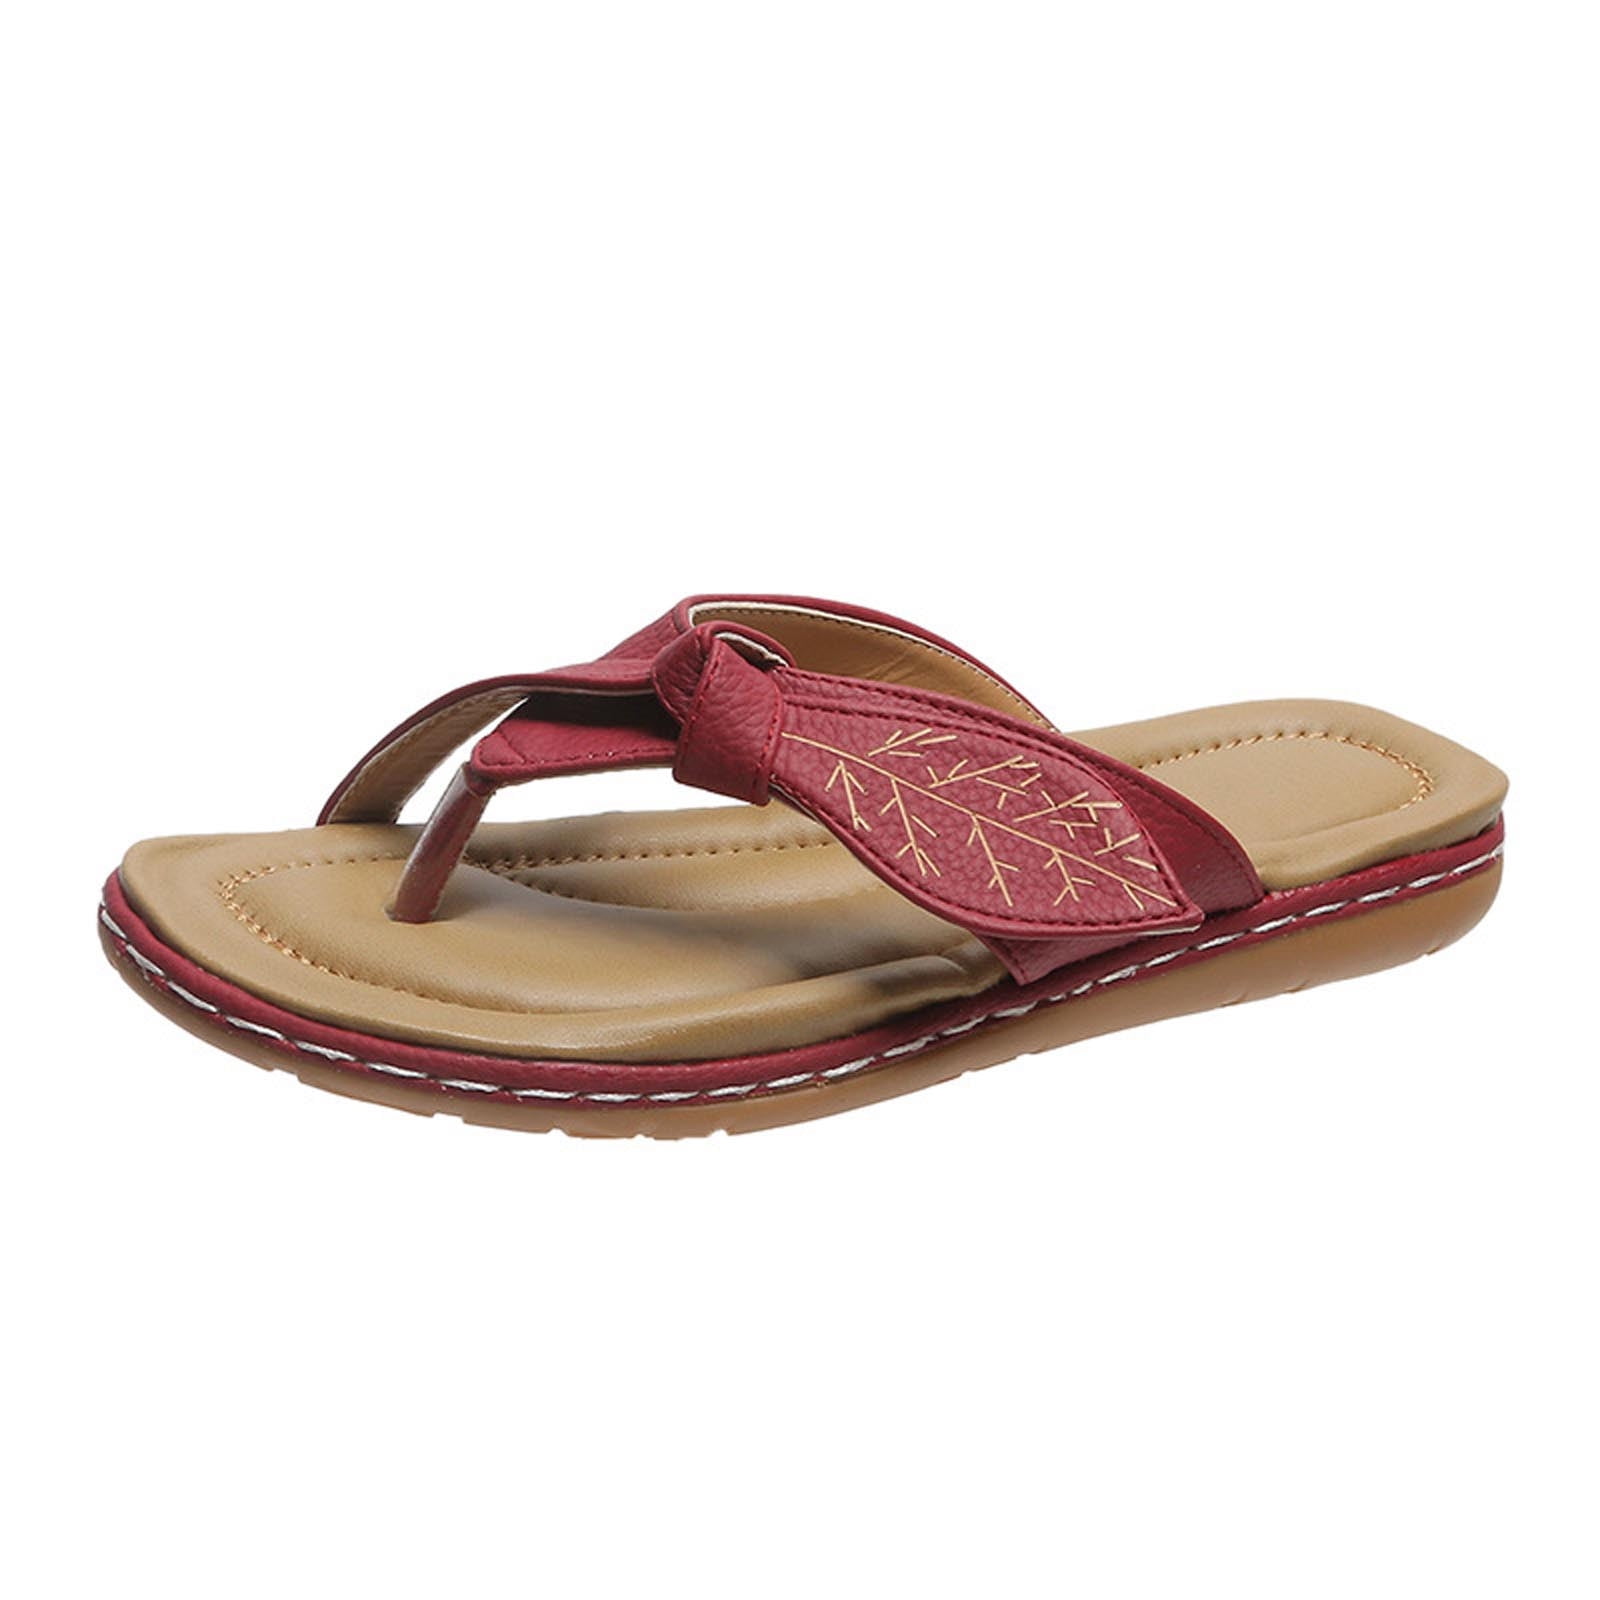 Arch Support Orthotic Sandals